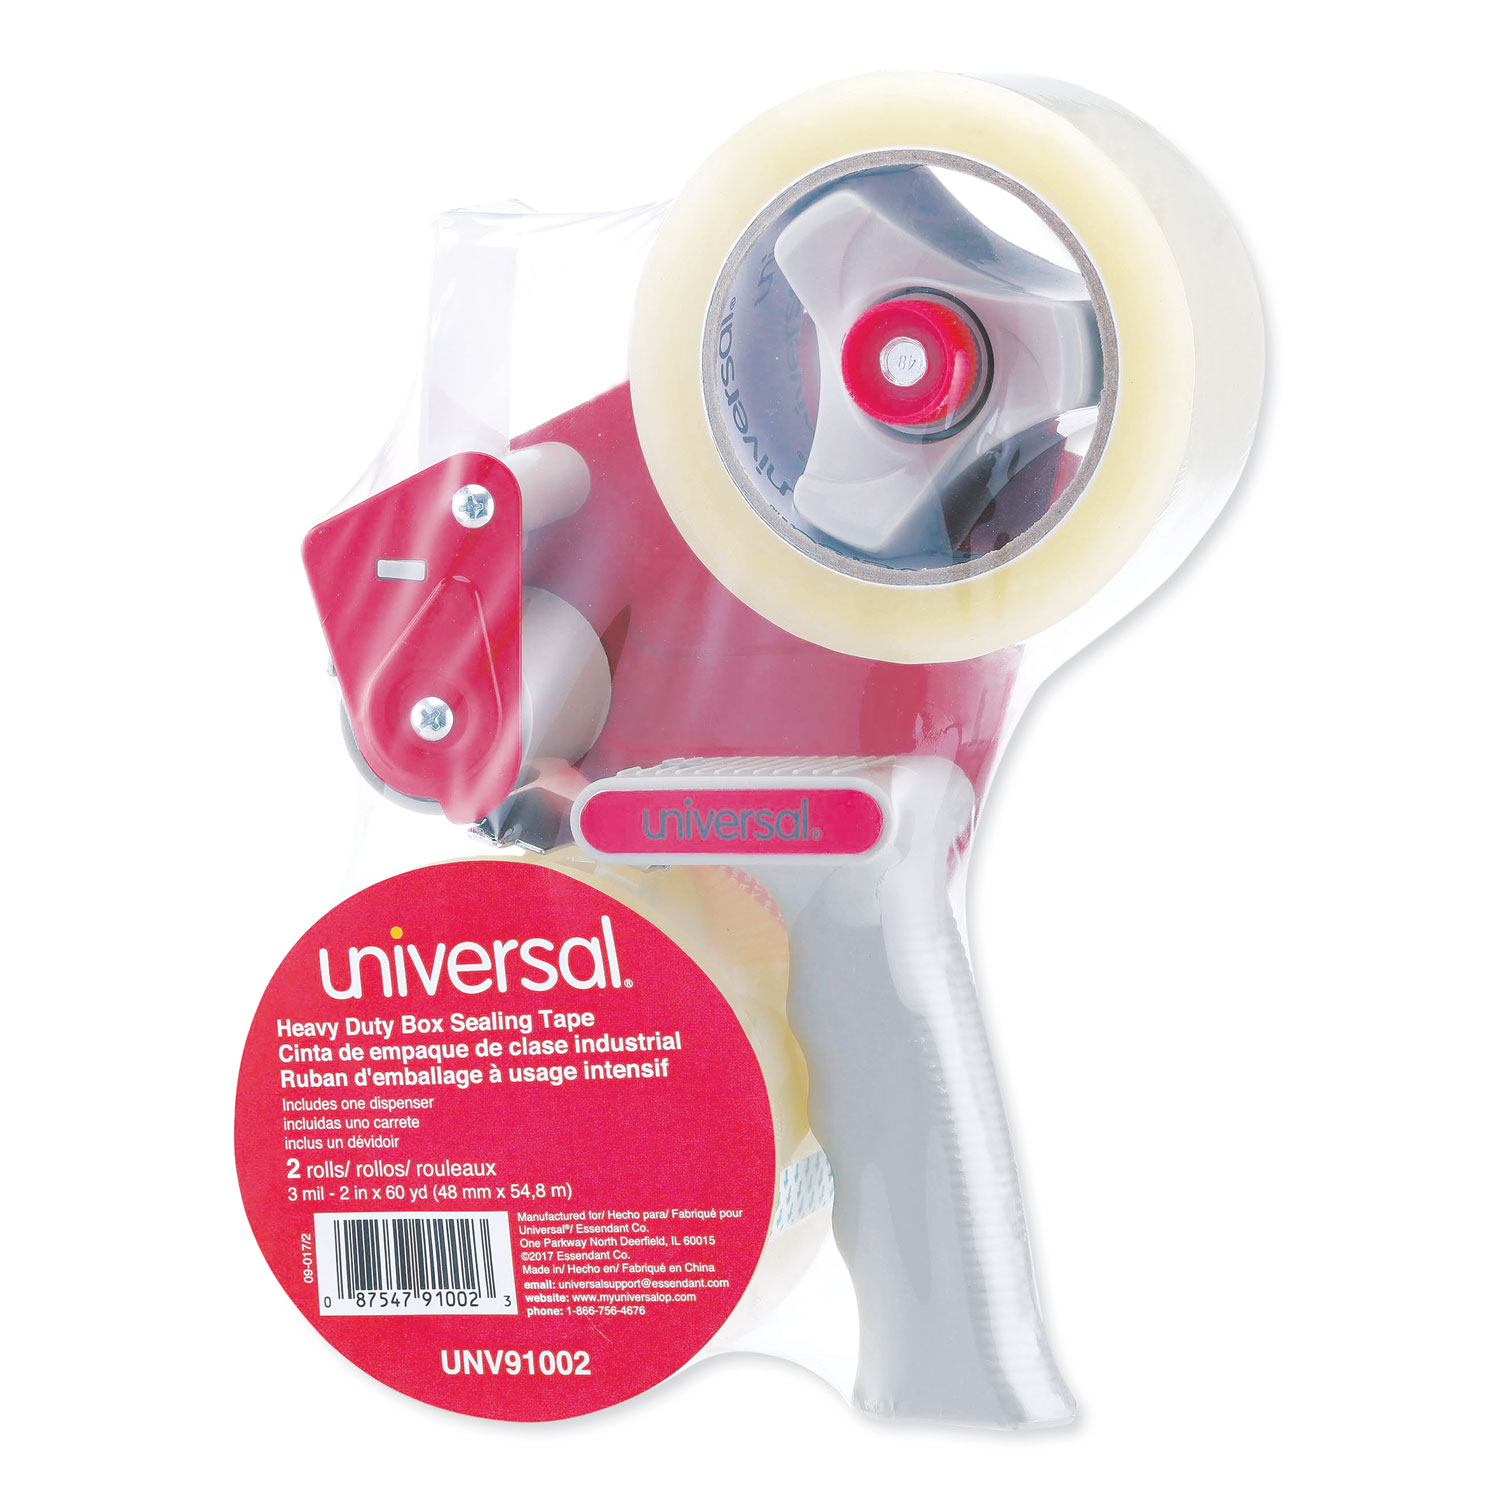  Universal UNV91002 Heavy-Duty Box Sealing Tape with Pistol Grip Dispenser, 3 Core, 1.88 x 60 yds, Clear, 1 Dispenser and 2 Tape Rolls/Pack (UNV91002) 